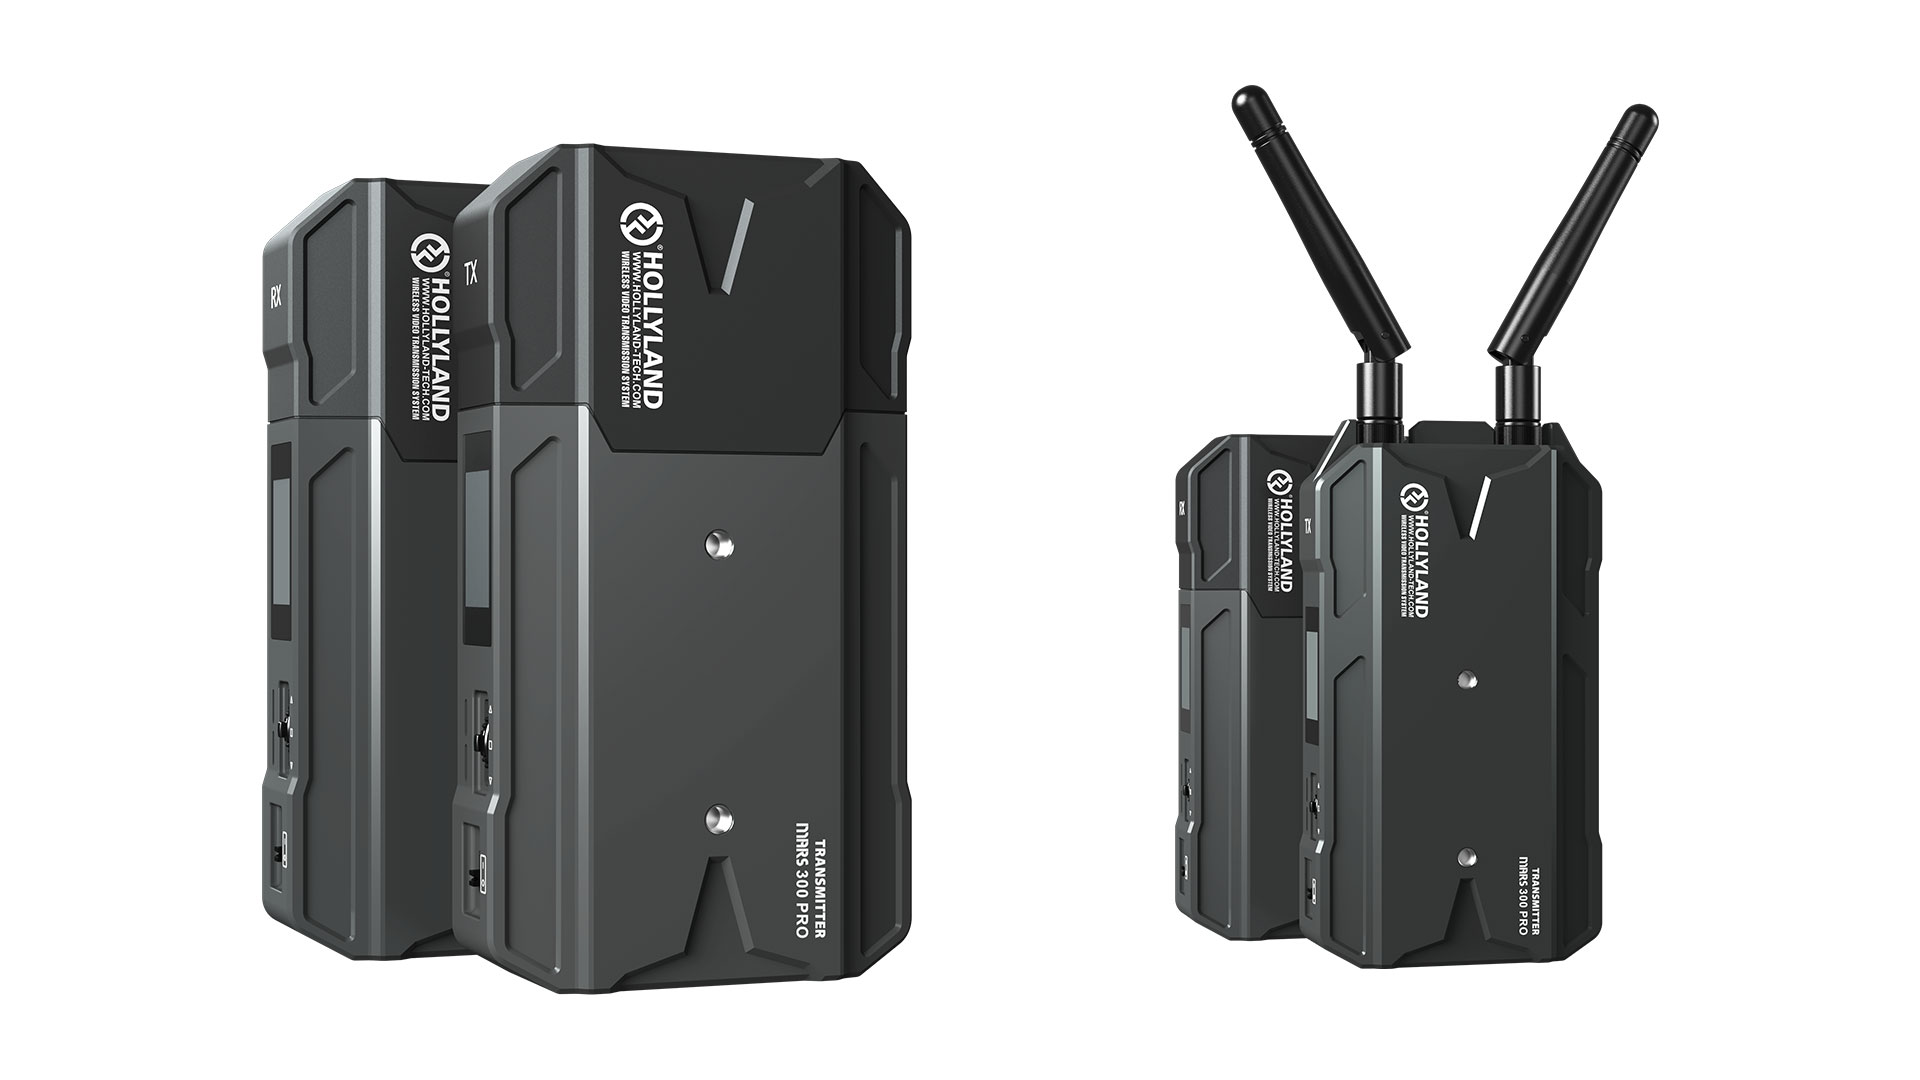 Hollyland MARS 300 PRO Wireless Video Transmitter Announced | CineD